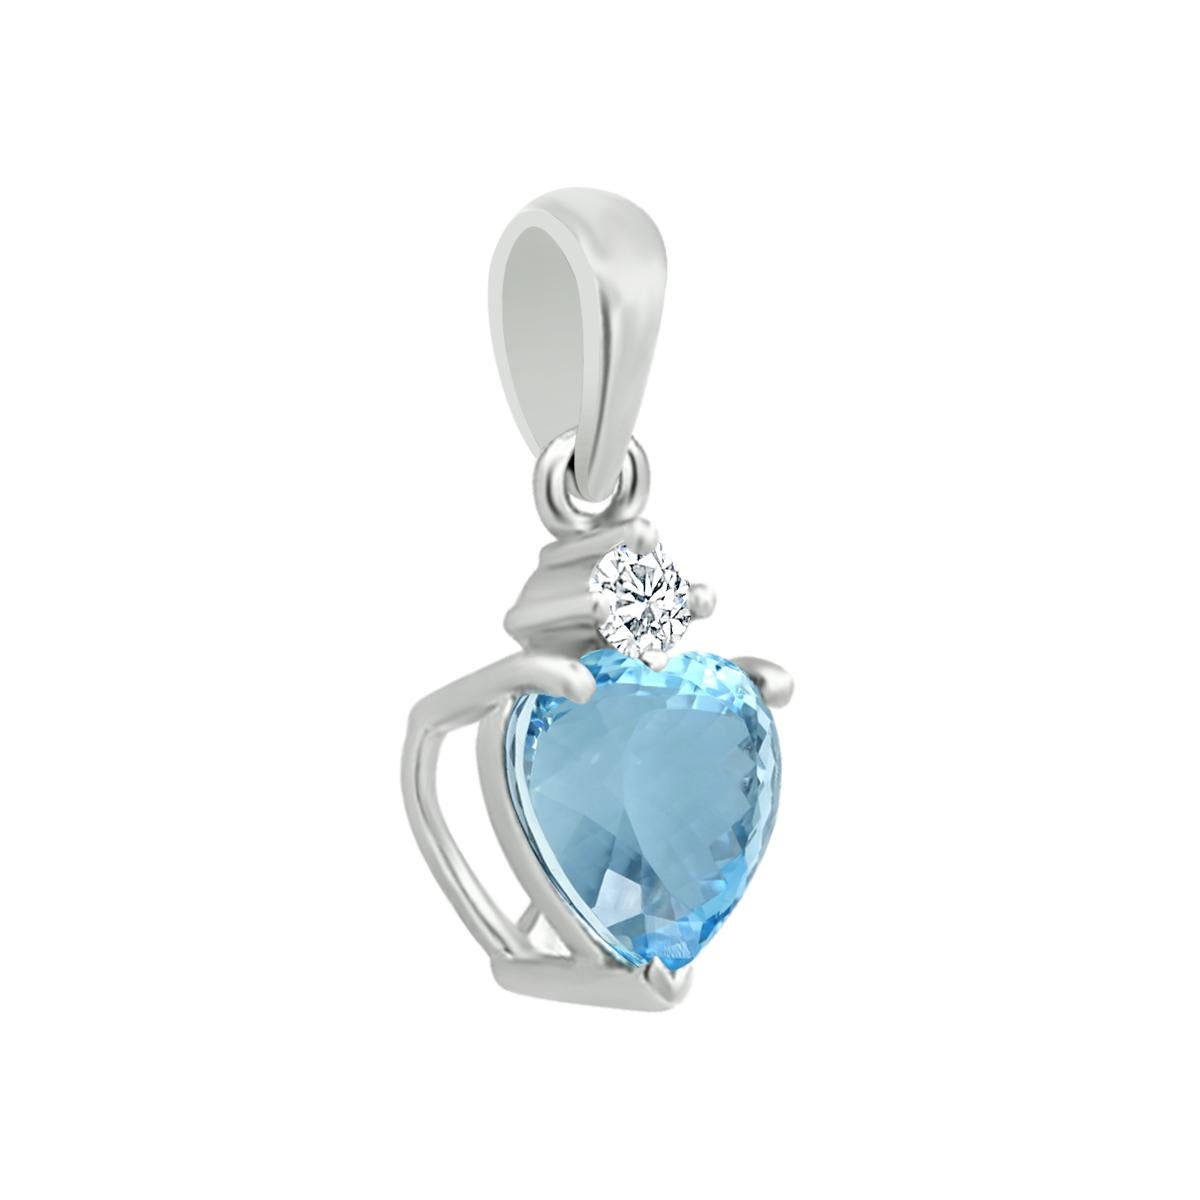 Bright And Vibrant, This Aquamarine Pendant Adorned With A Diamond Radiant Warmth. 
This Pendant Features A 6mm Icy-Blue Aquamarine Gemstone In Heart Shape With A Diamond On Top.
This Aqua Pendant Is Crafted In 14K White Gold And A Perfect Jewelry